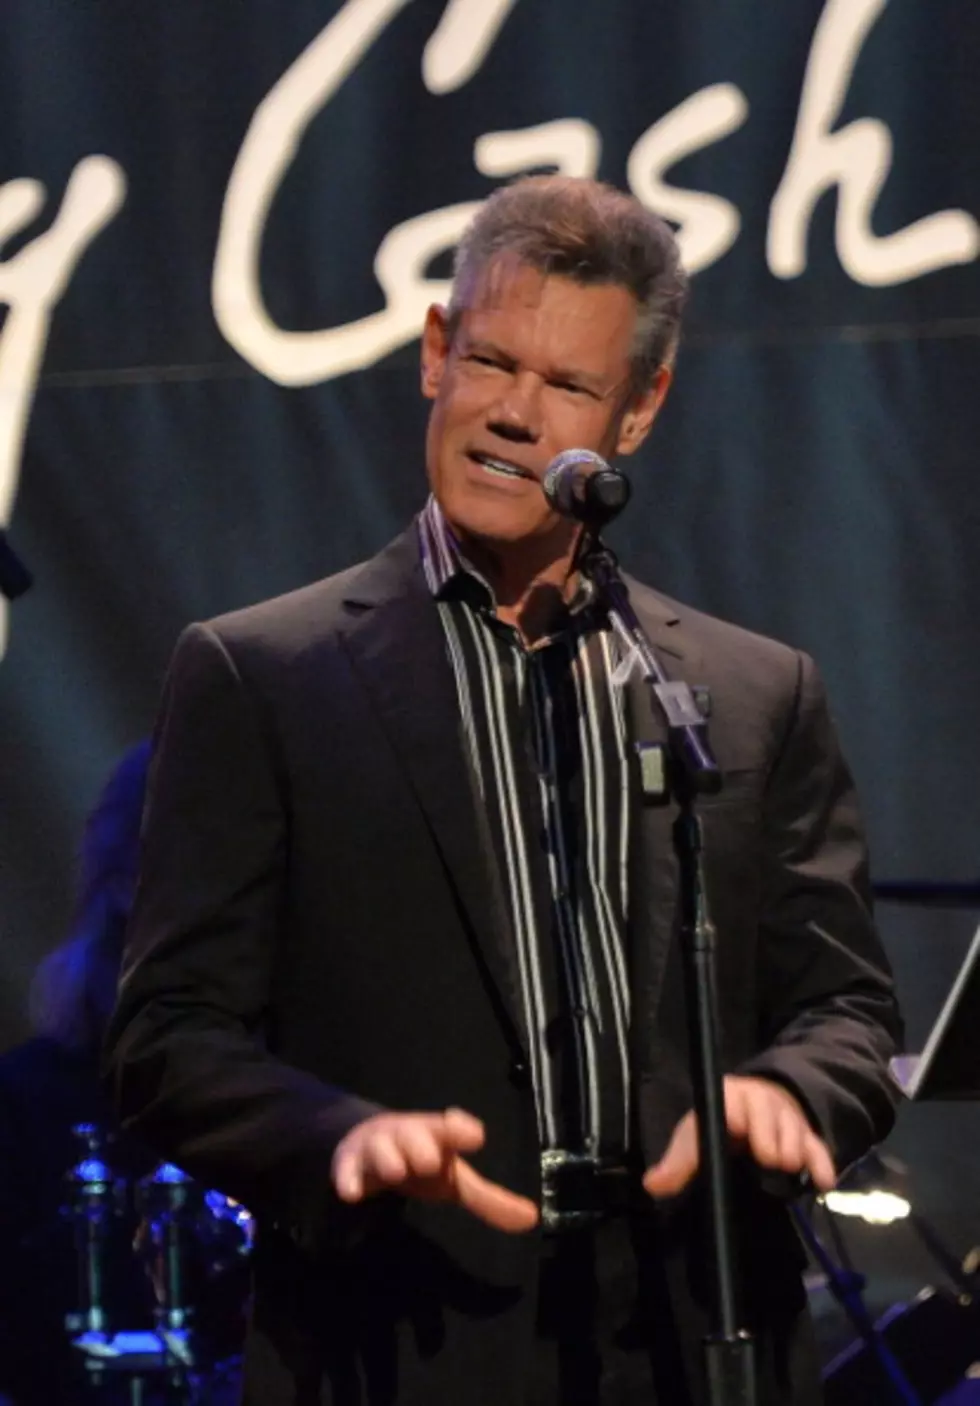 Randy Travis Looks Thin and Frail in New Pics